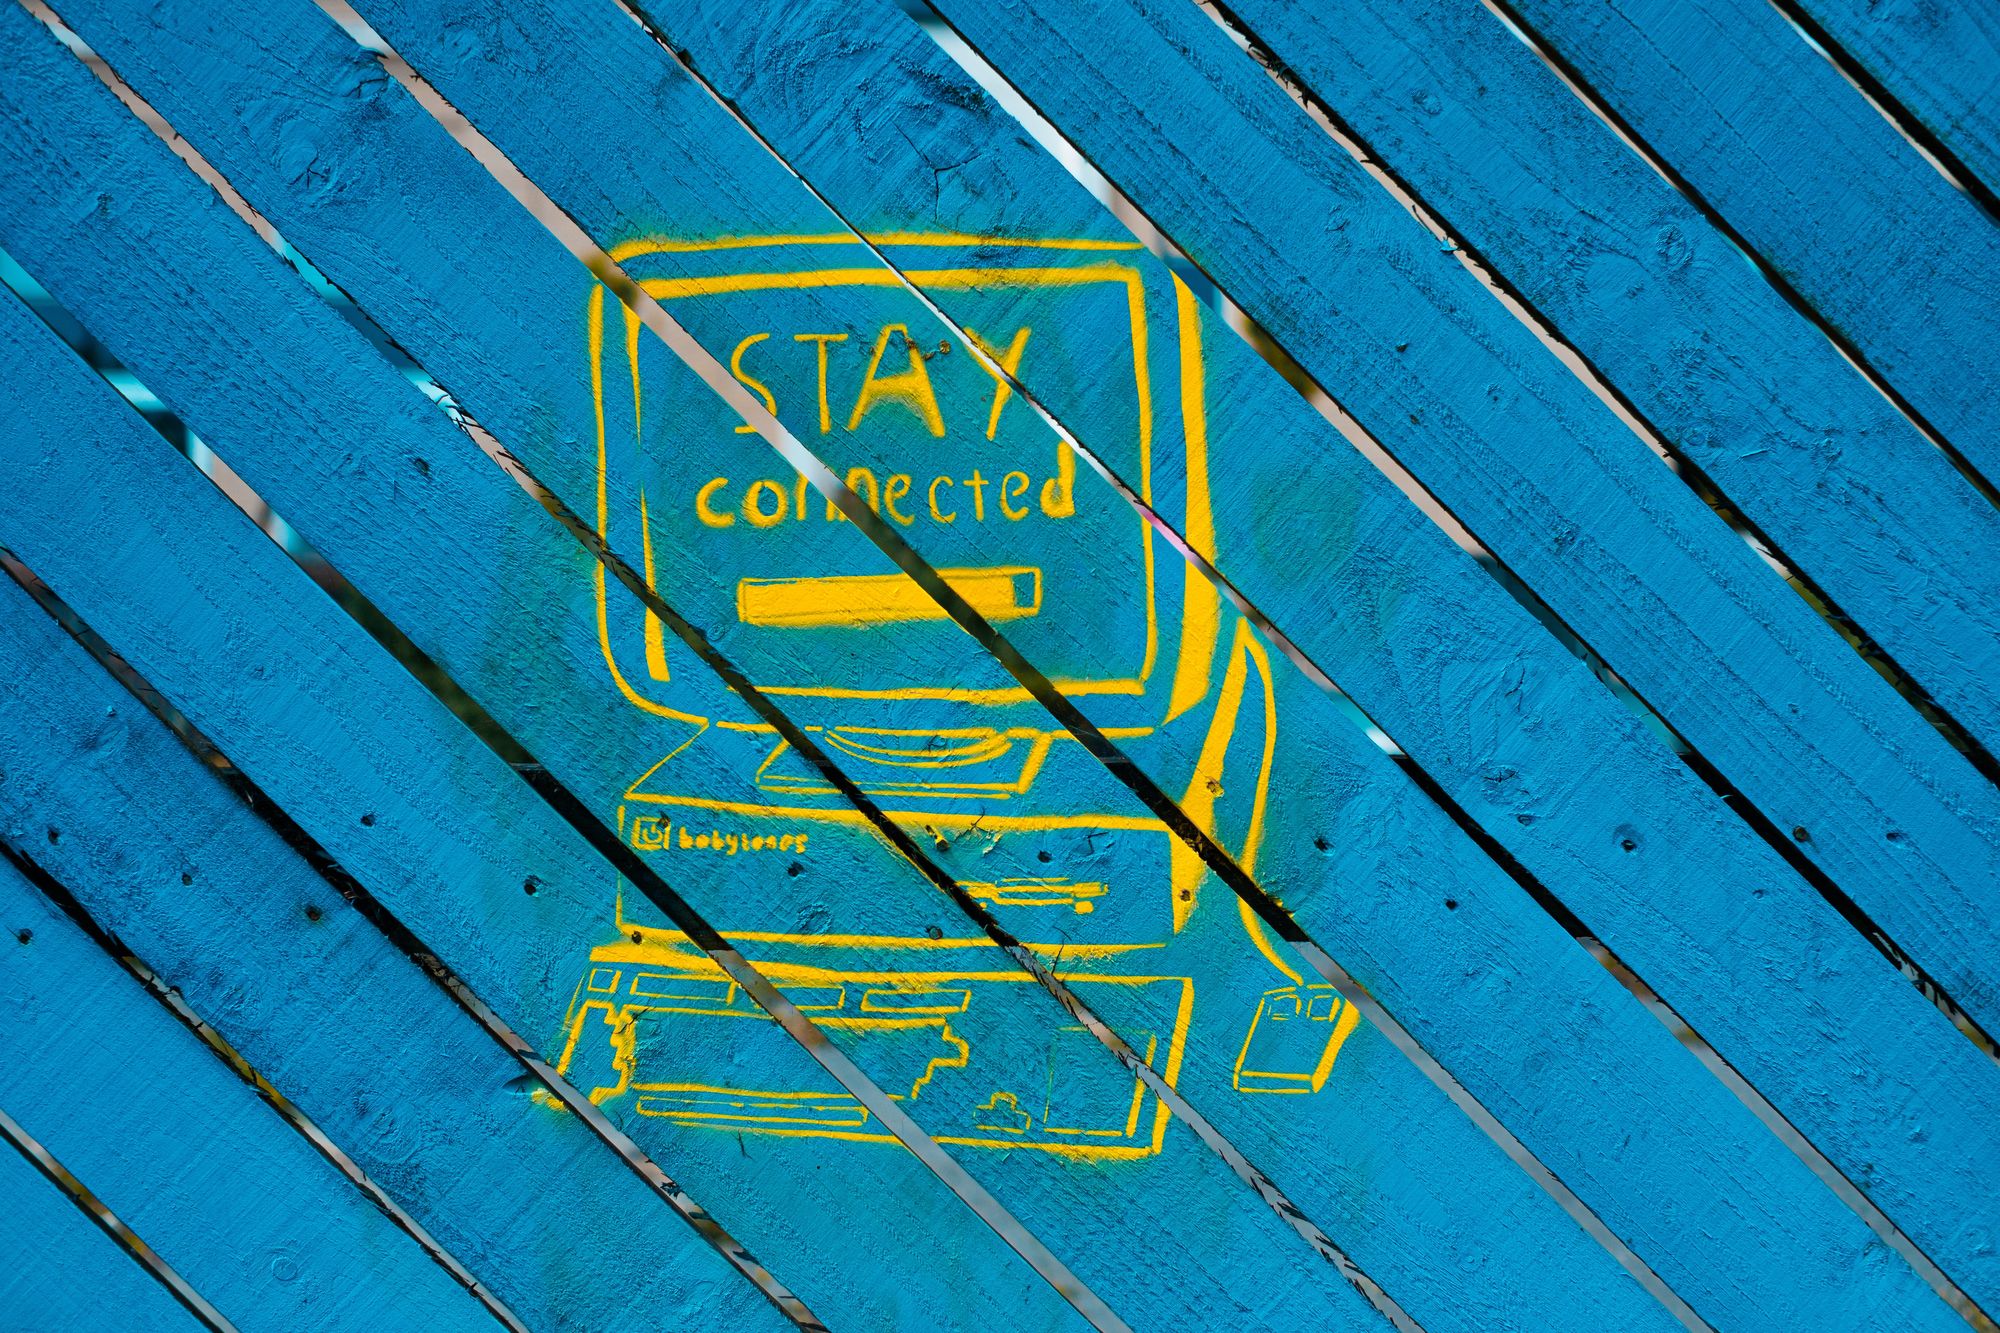 Stay connected sign on wall